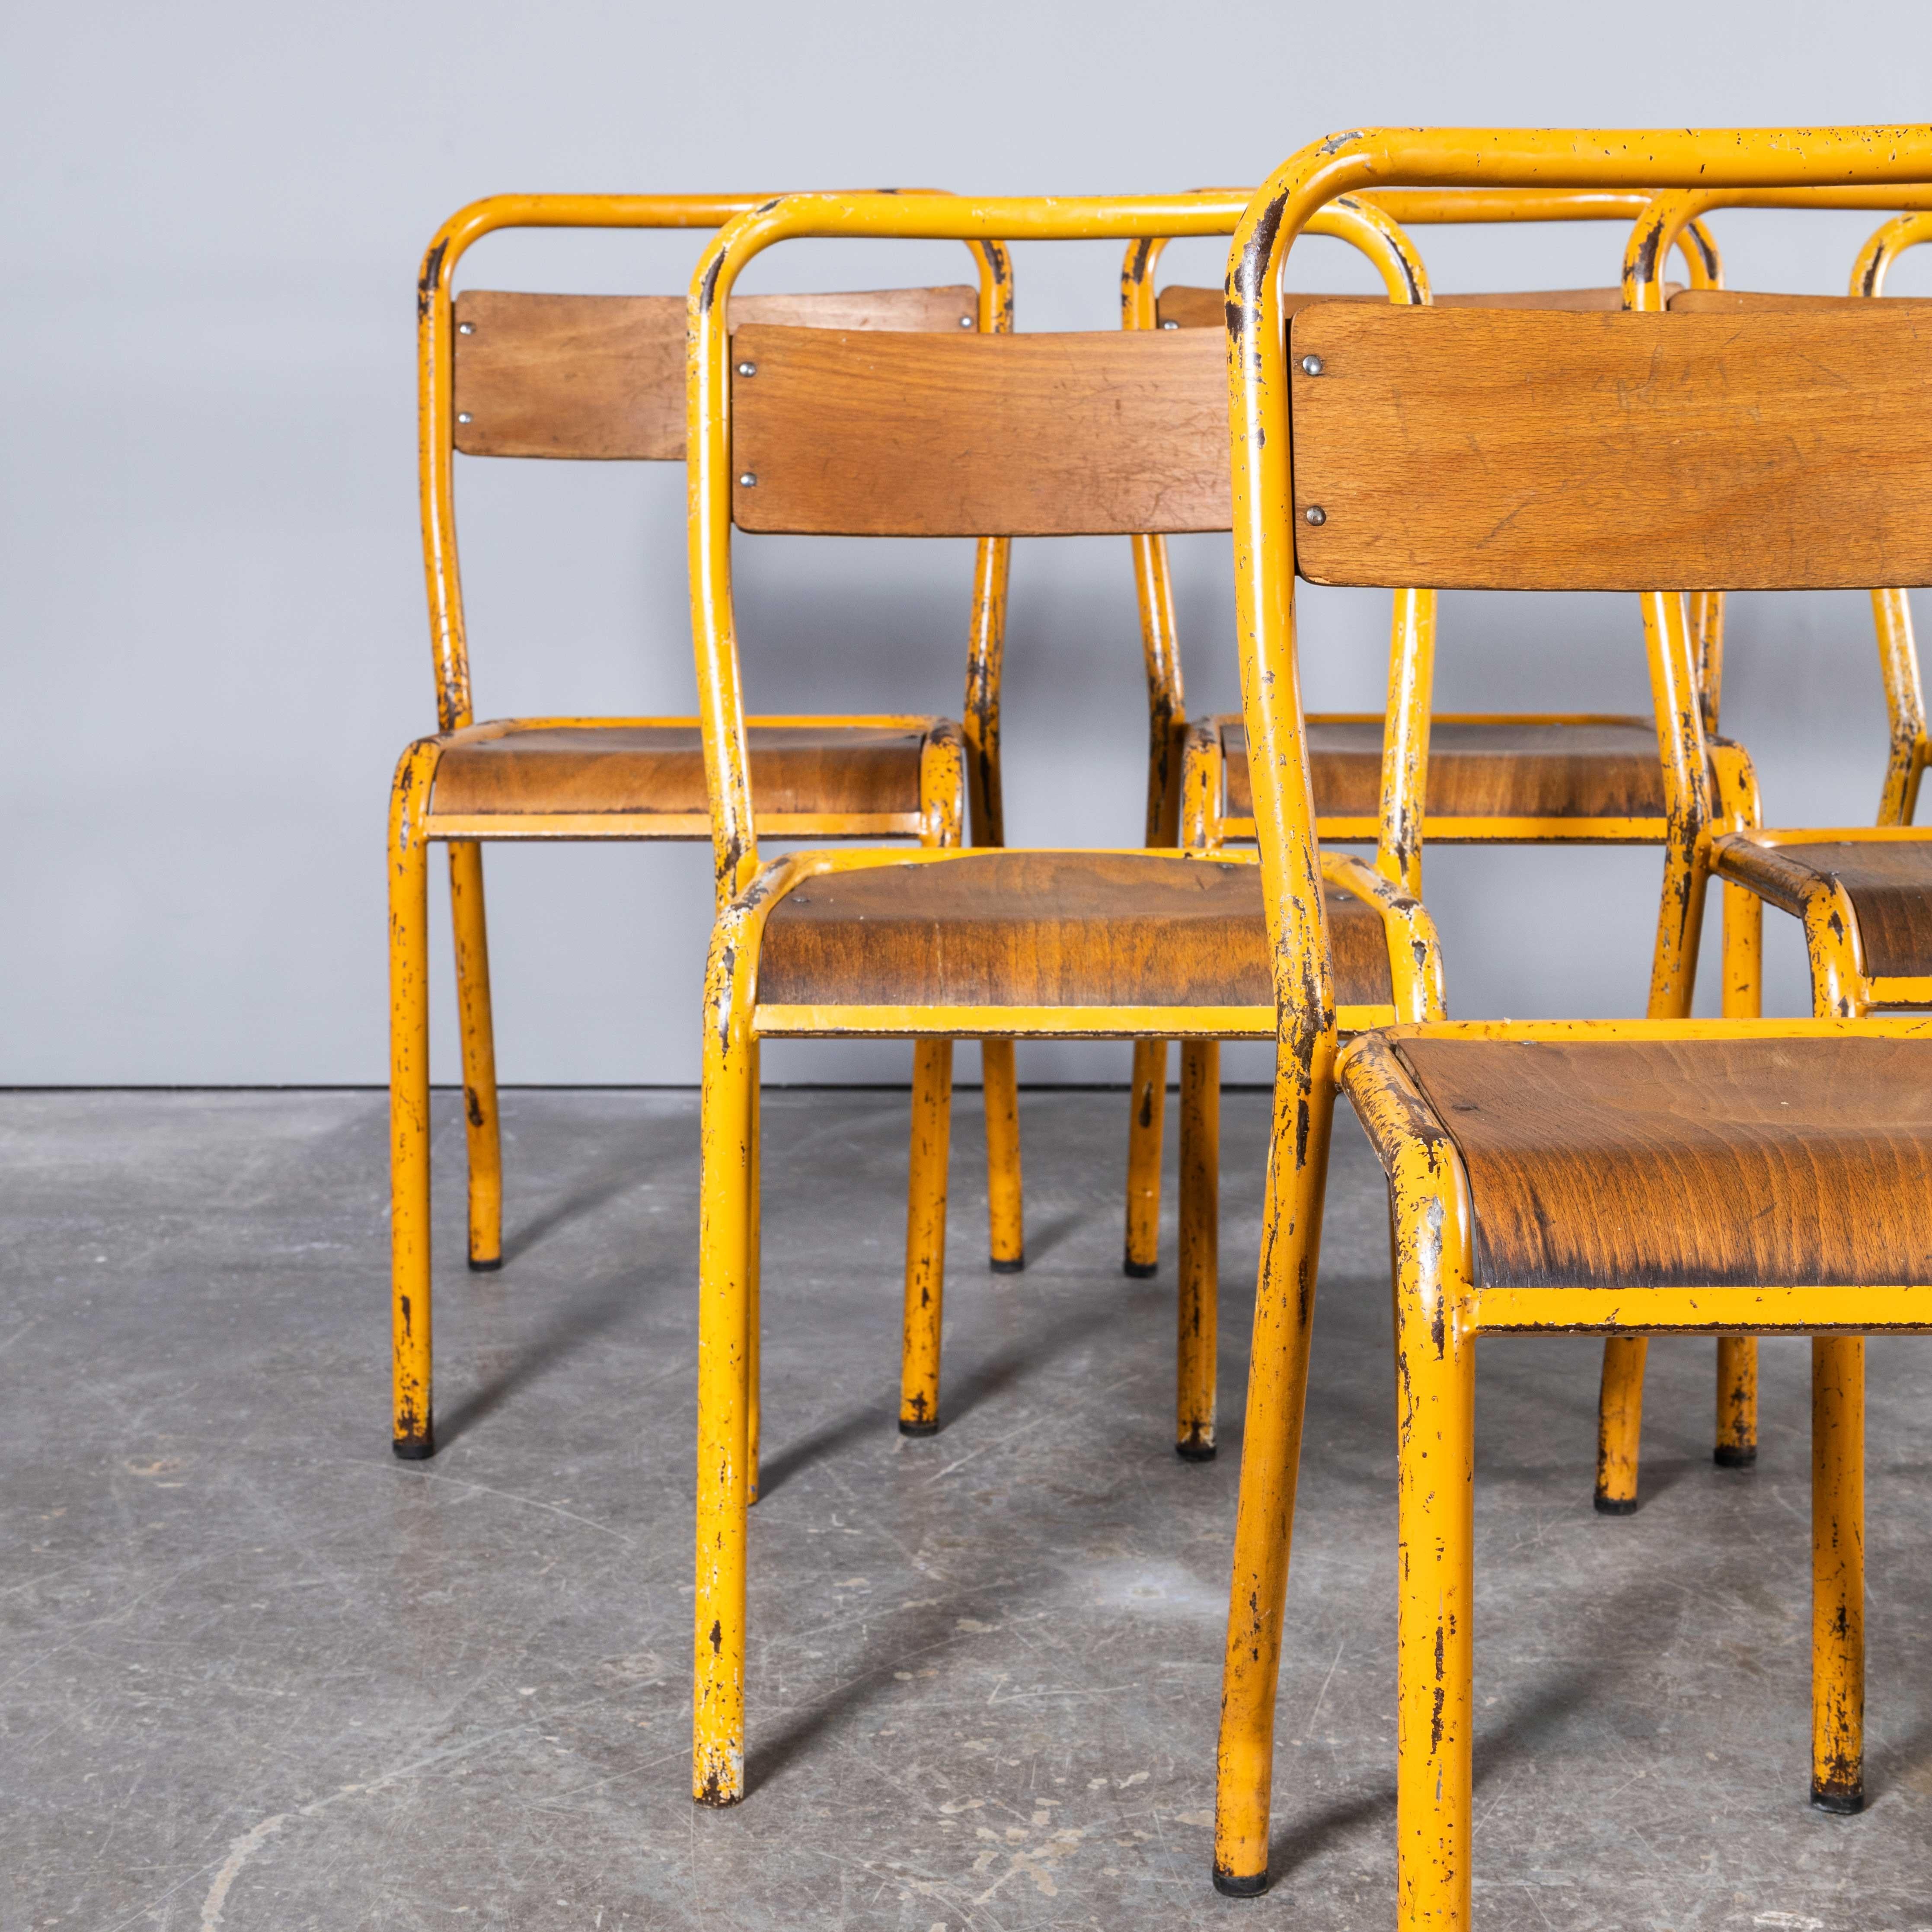 1950’s Original Yellow French Tolix Wood Seat Metal Bistro Dining Chair – Large Quantities Available
1950’s Original Yellow French Tolix Wood Seat Metal Bistro Dining Chair – Large Quantities Available. Tolix is one of our all time favourite